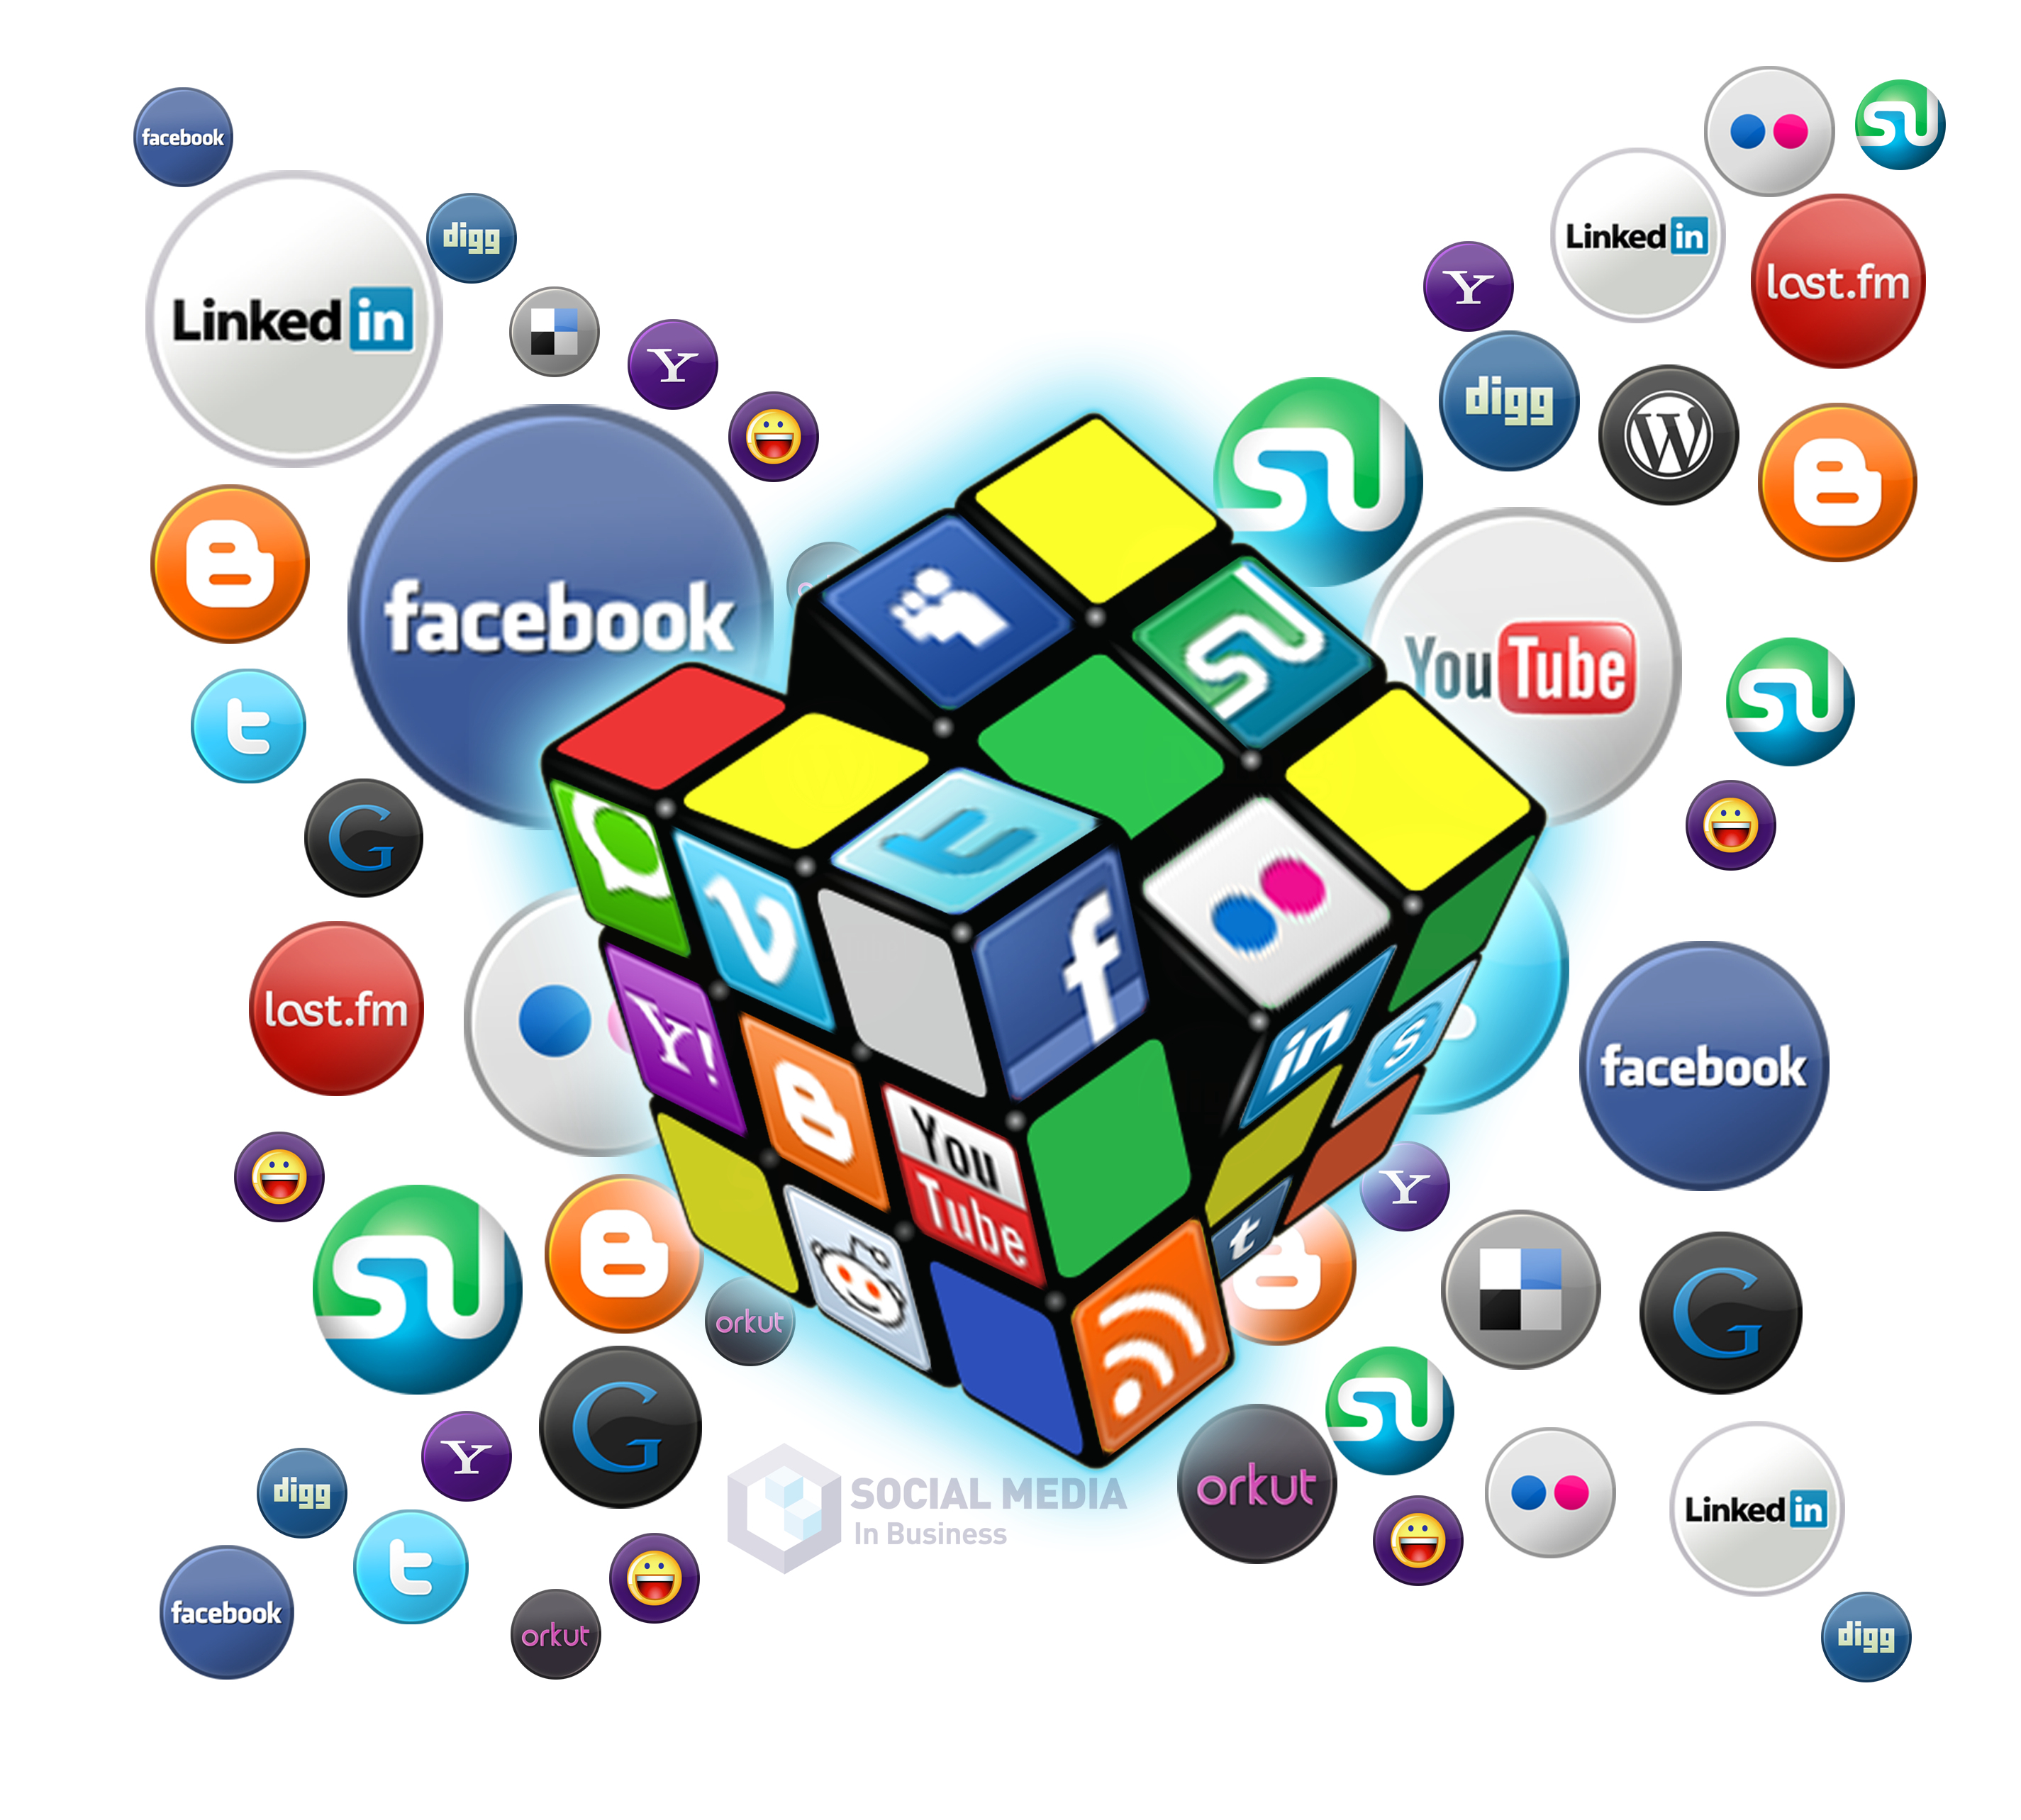 Three Things That All Social Networks Have In Common